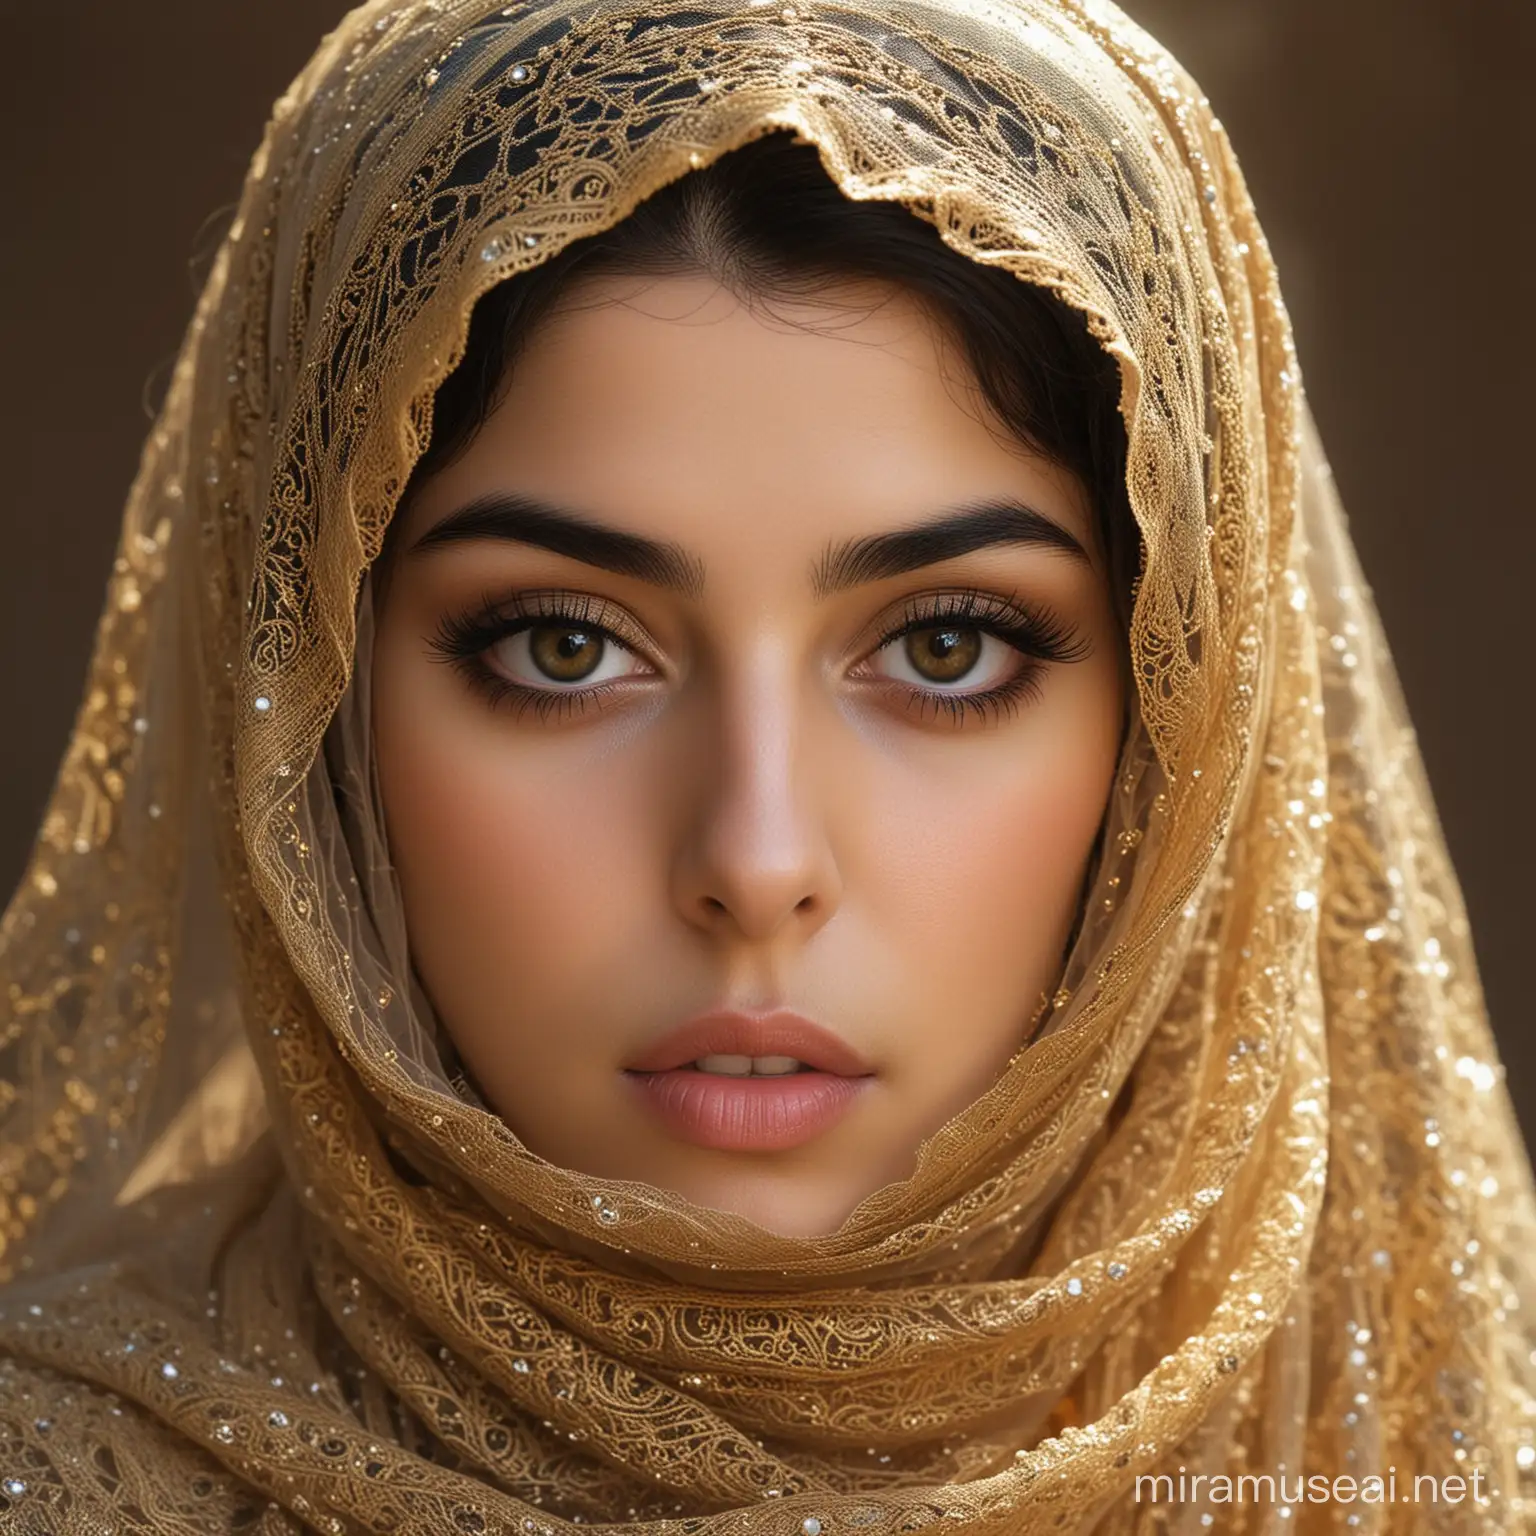 Iranian Veiled Woman with Golden Veil and Captivating Eyes